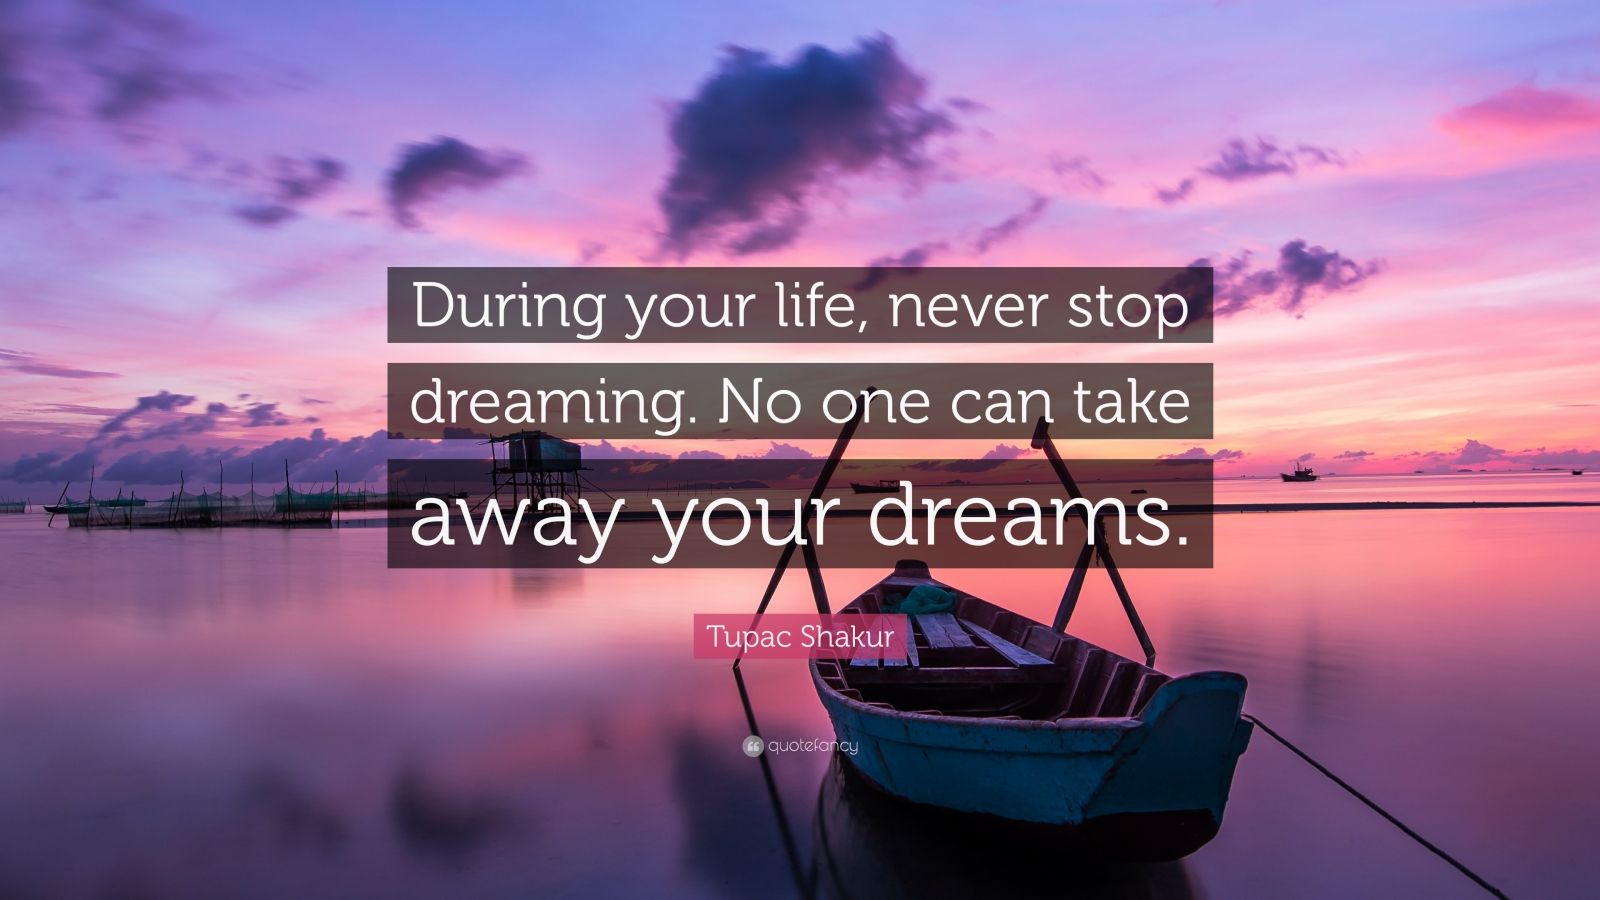 Tupac Shakur Quote: “During your life, never stop dreaming. No one can